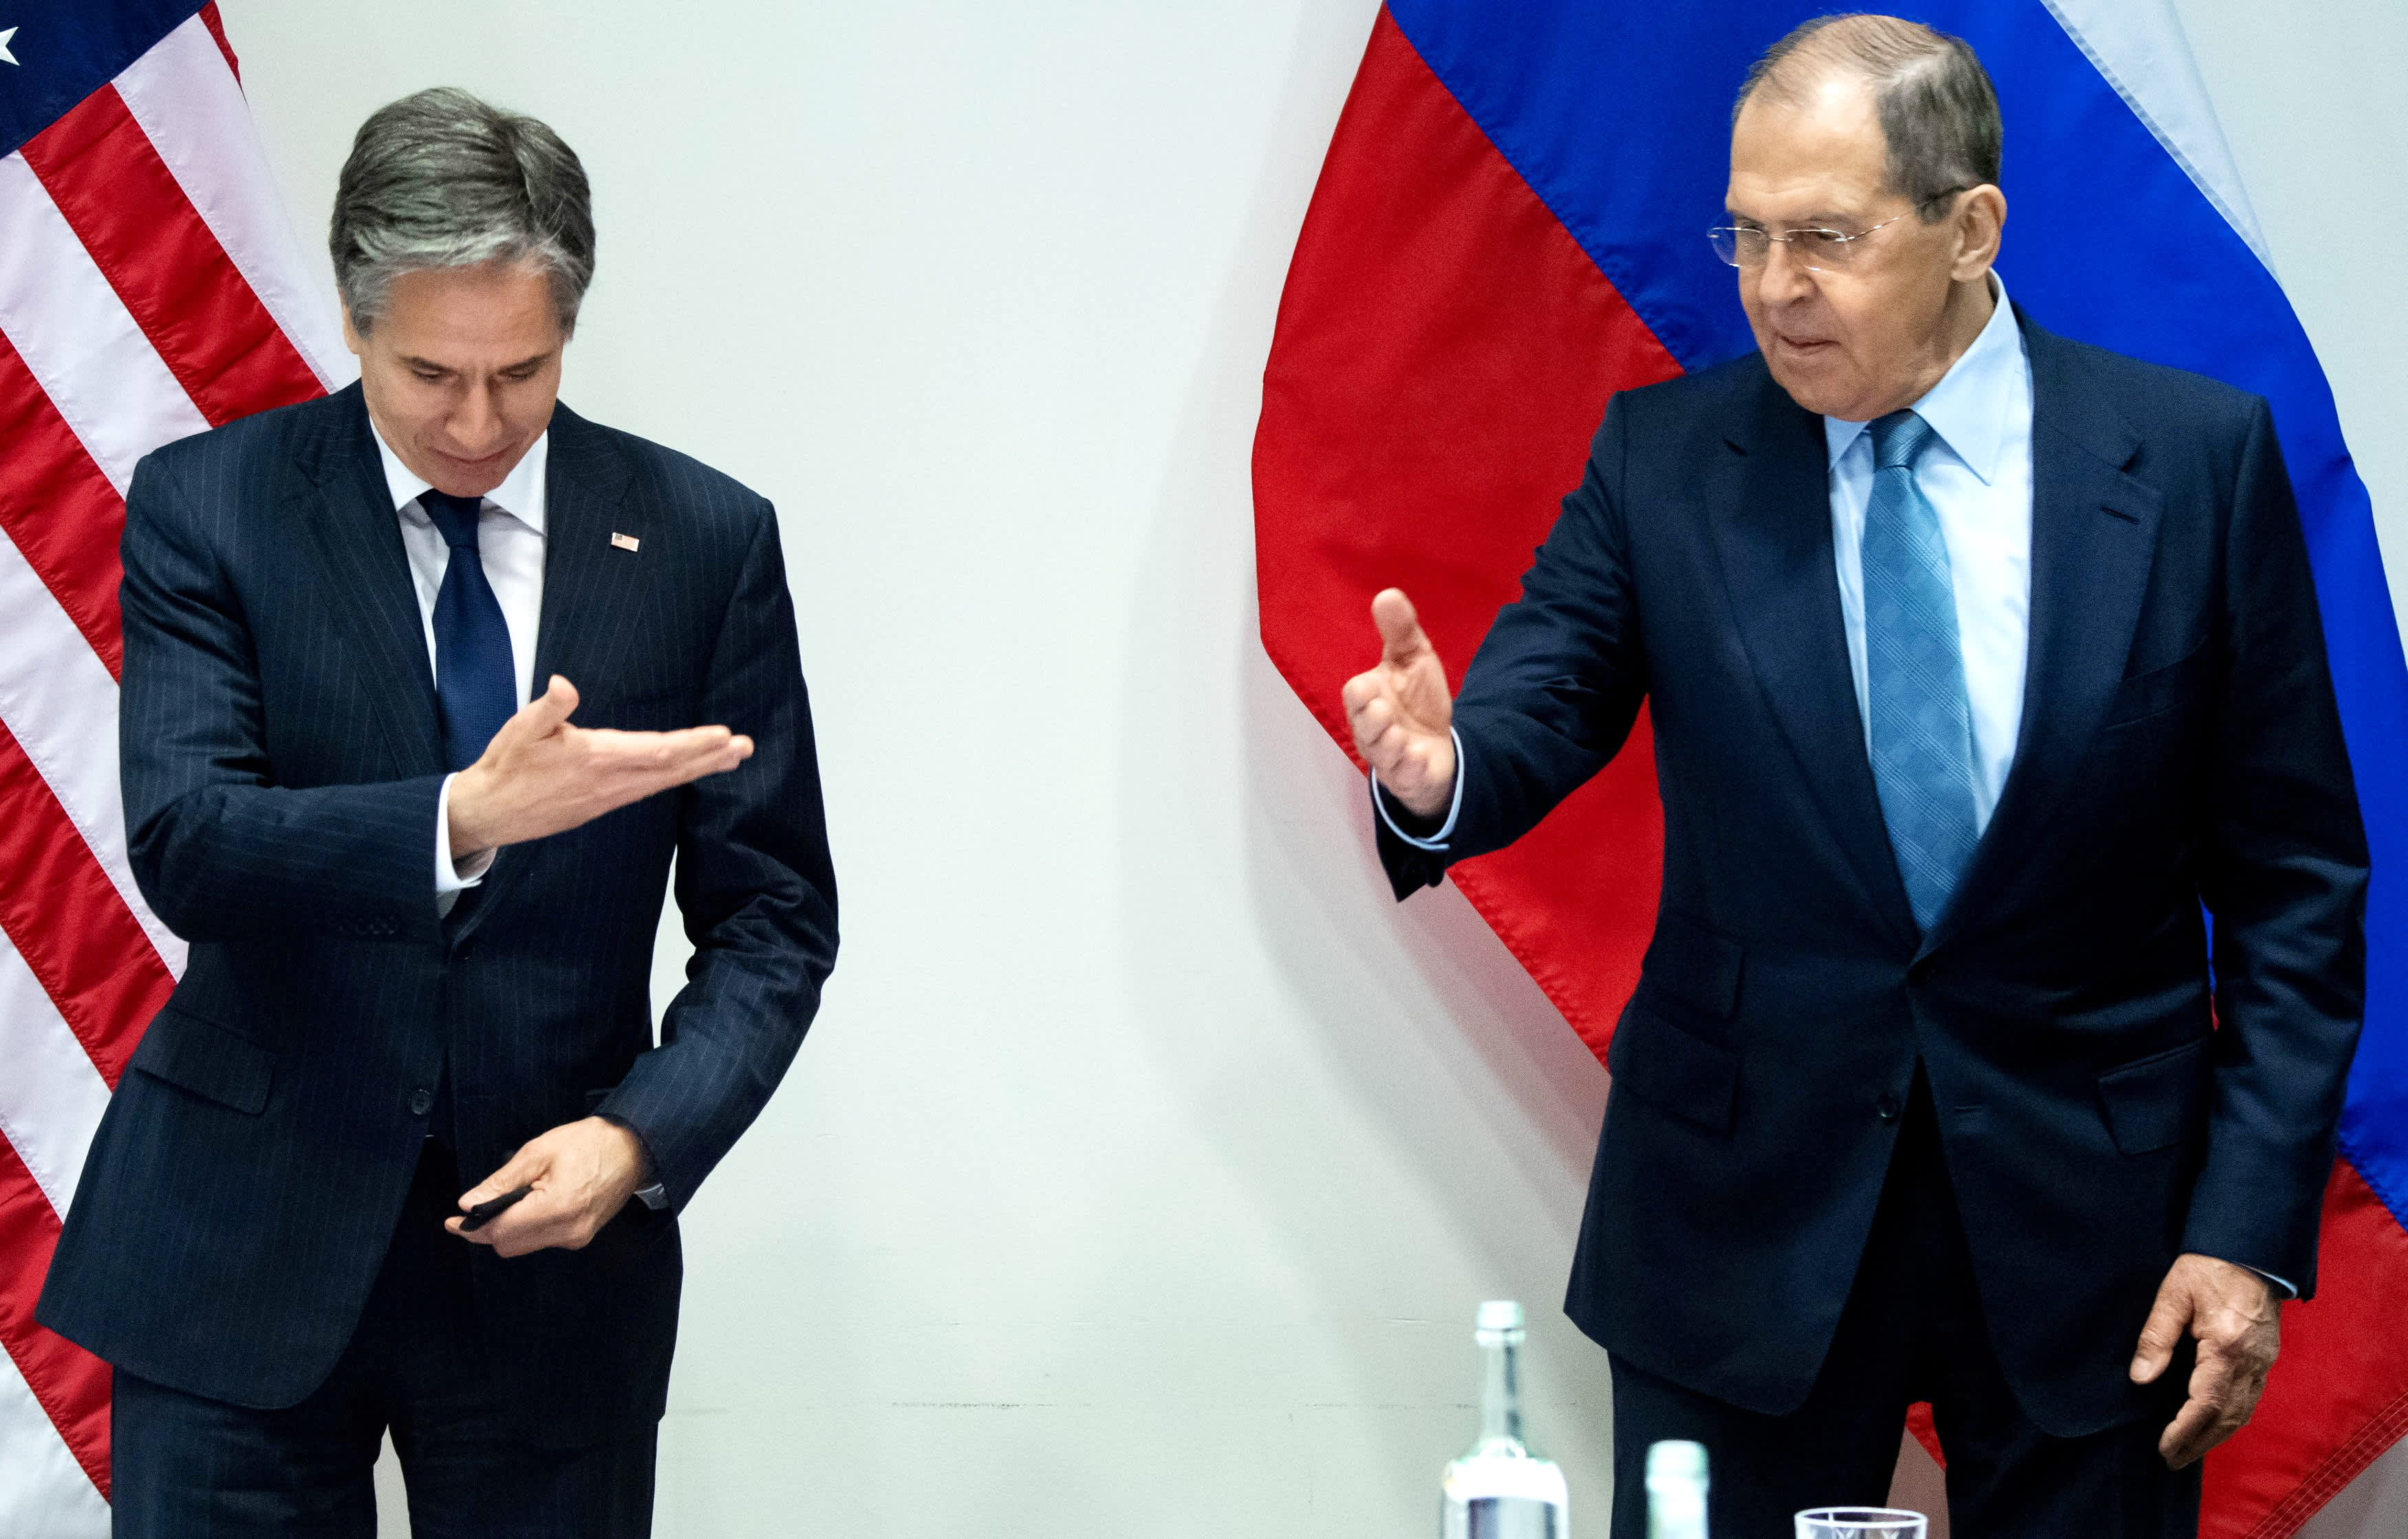 Blinken and Lavrov tread carefully in first face to face under Biden